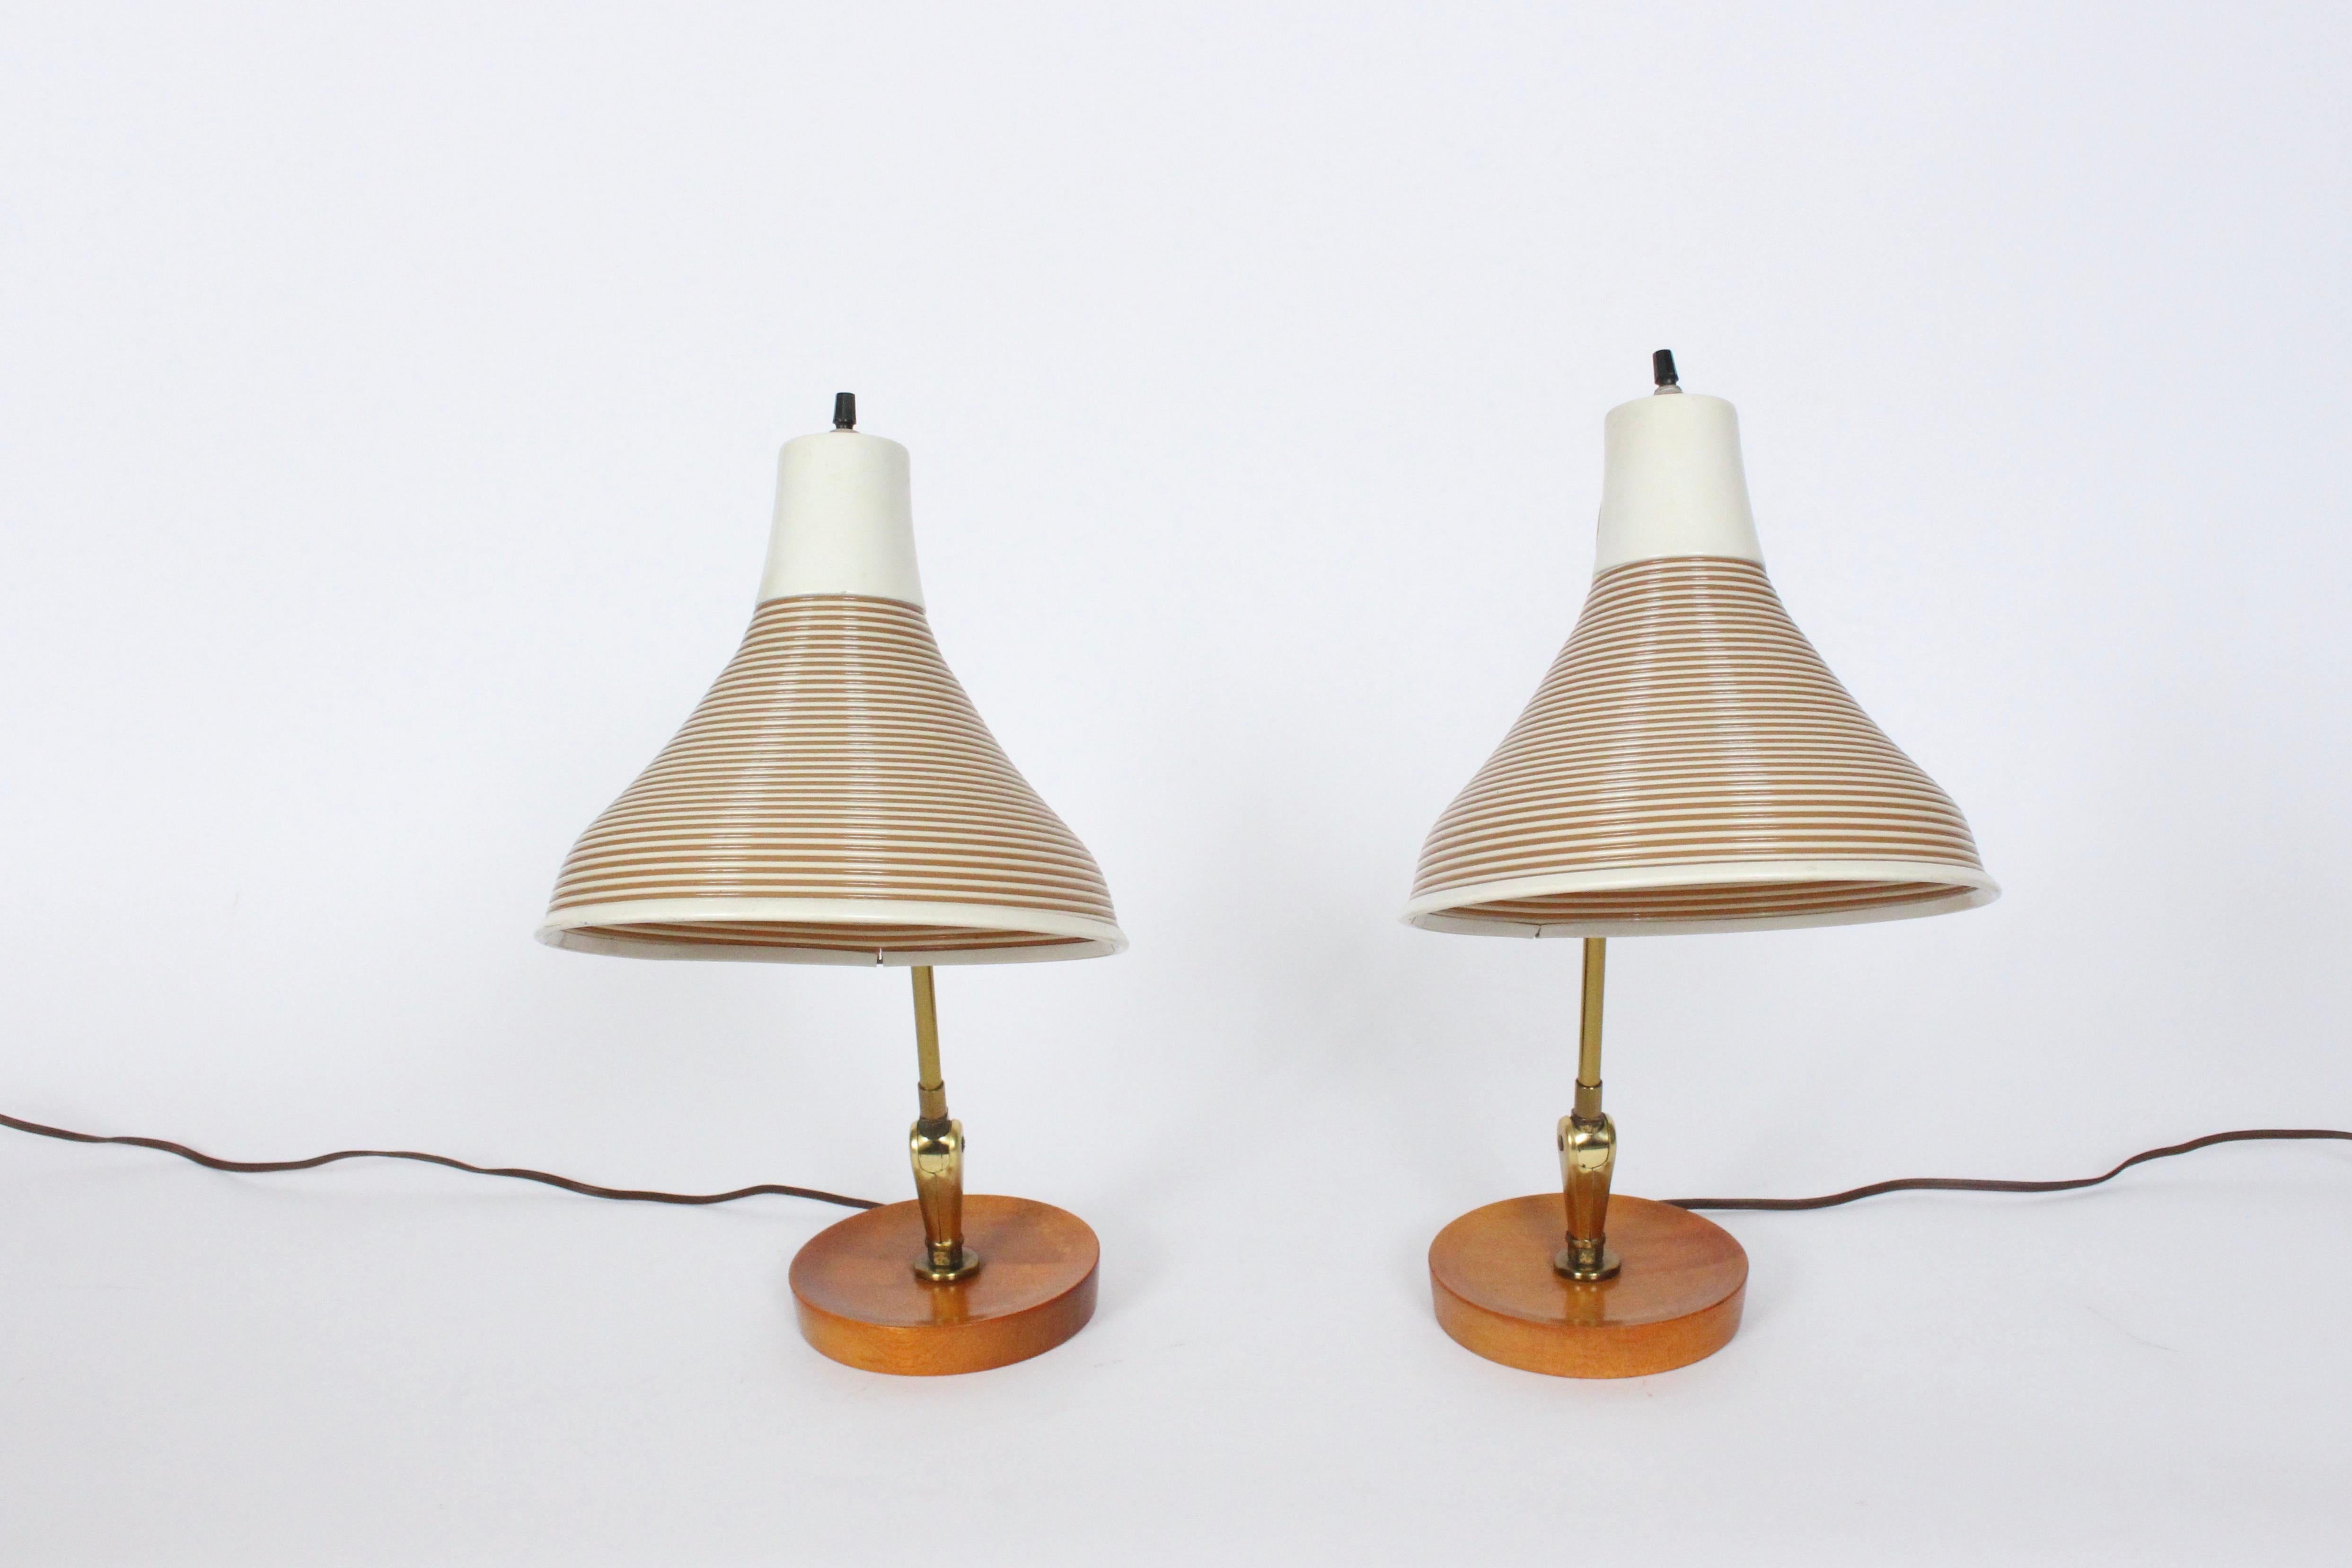 Pair Yasha Heifetz Adjusting Maple Desk Lamps with Beige Rotaflex Shades, 1950's In Good Condition For Sale In Bainbridge, NY